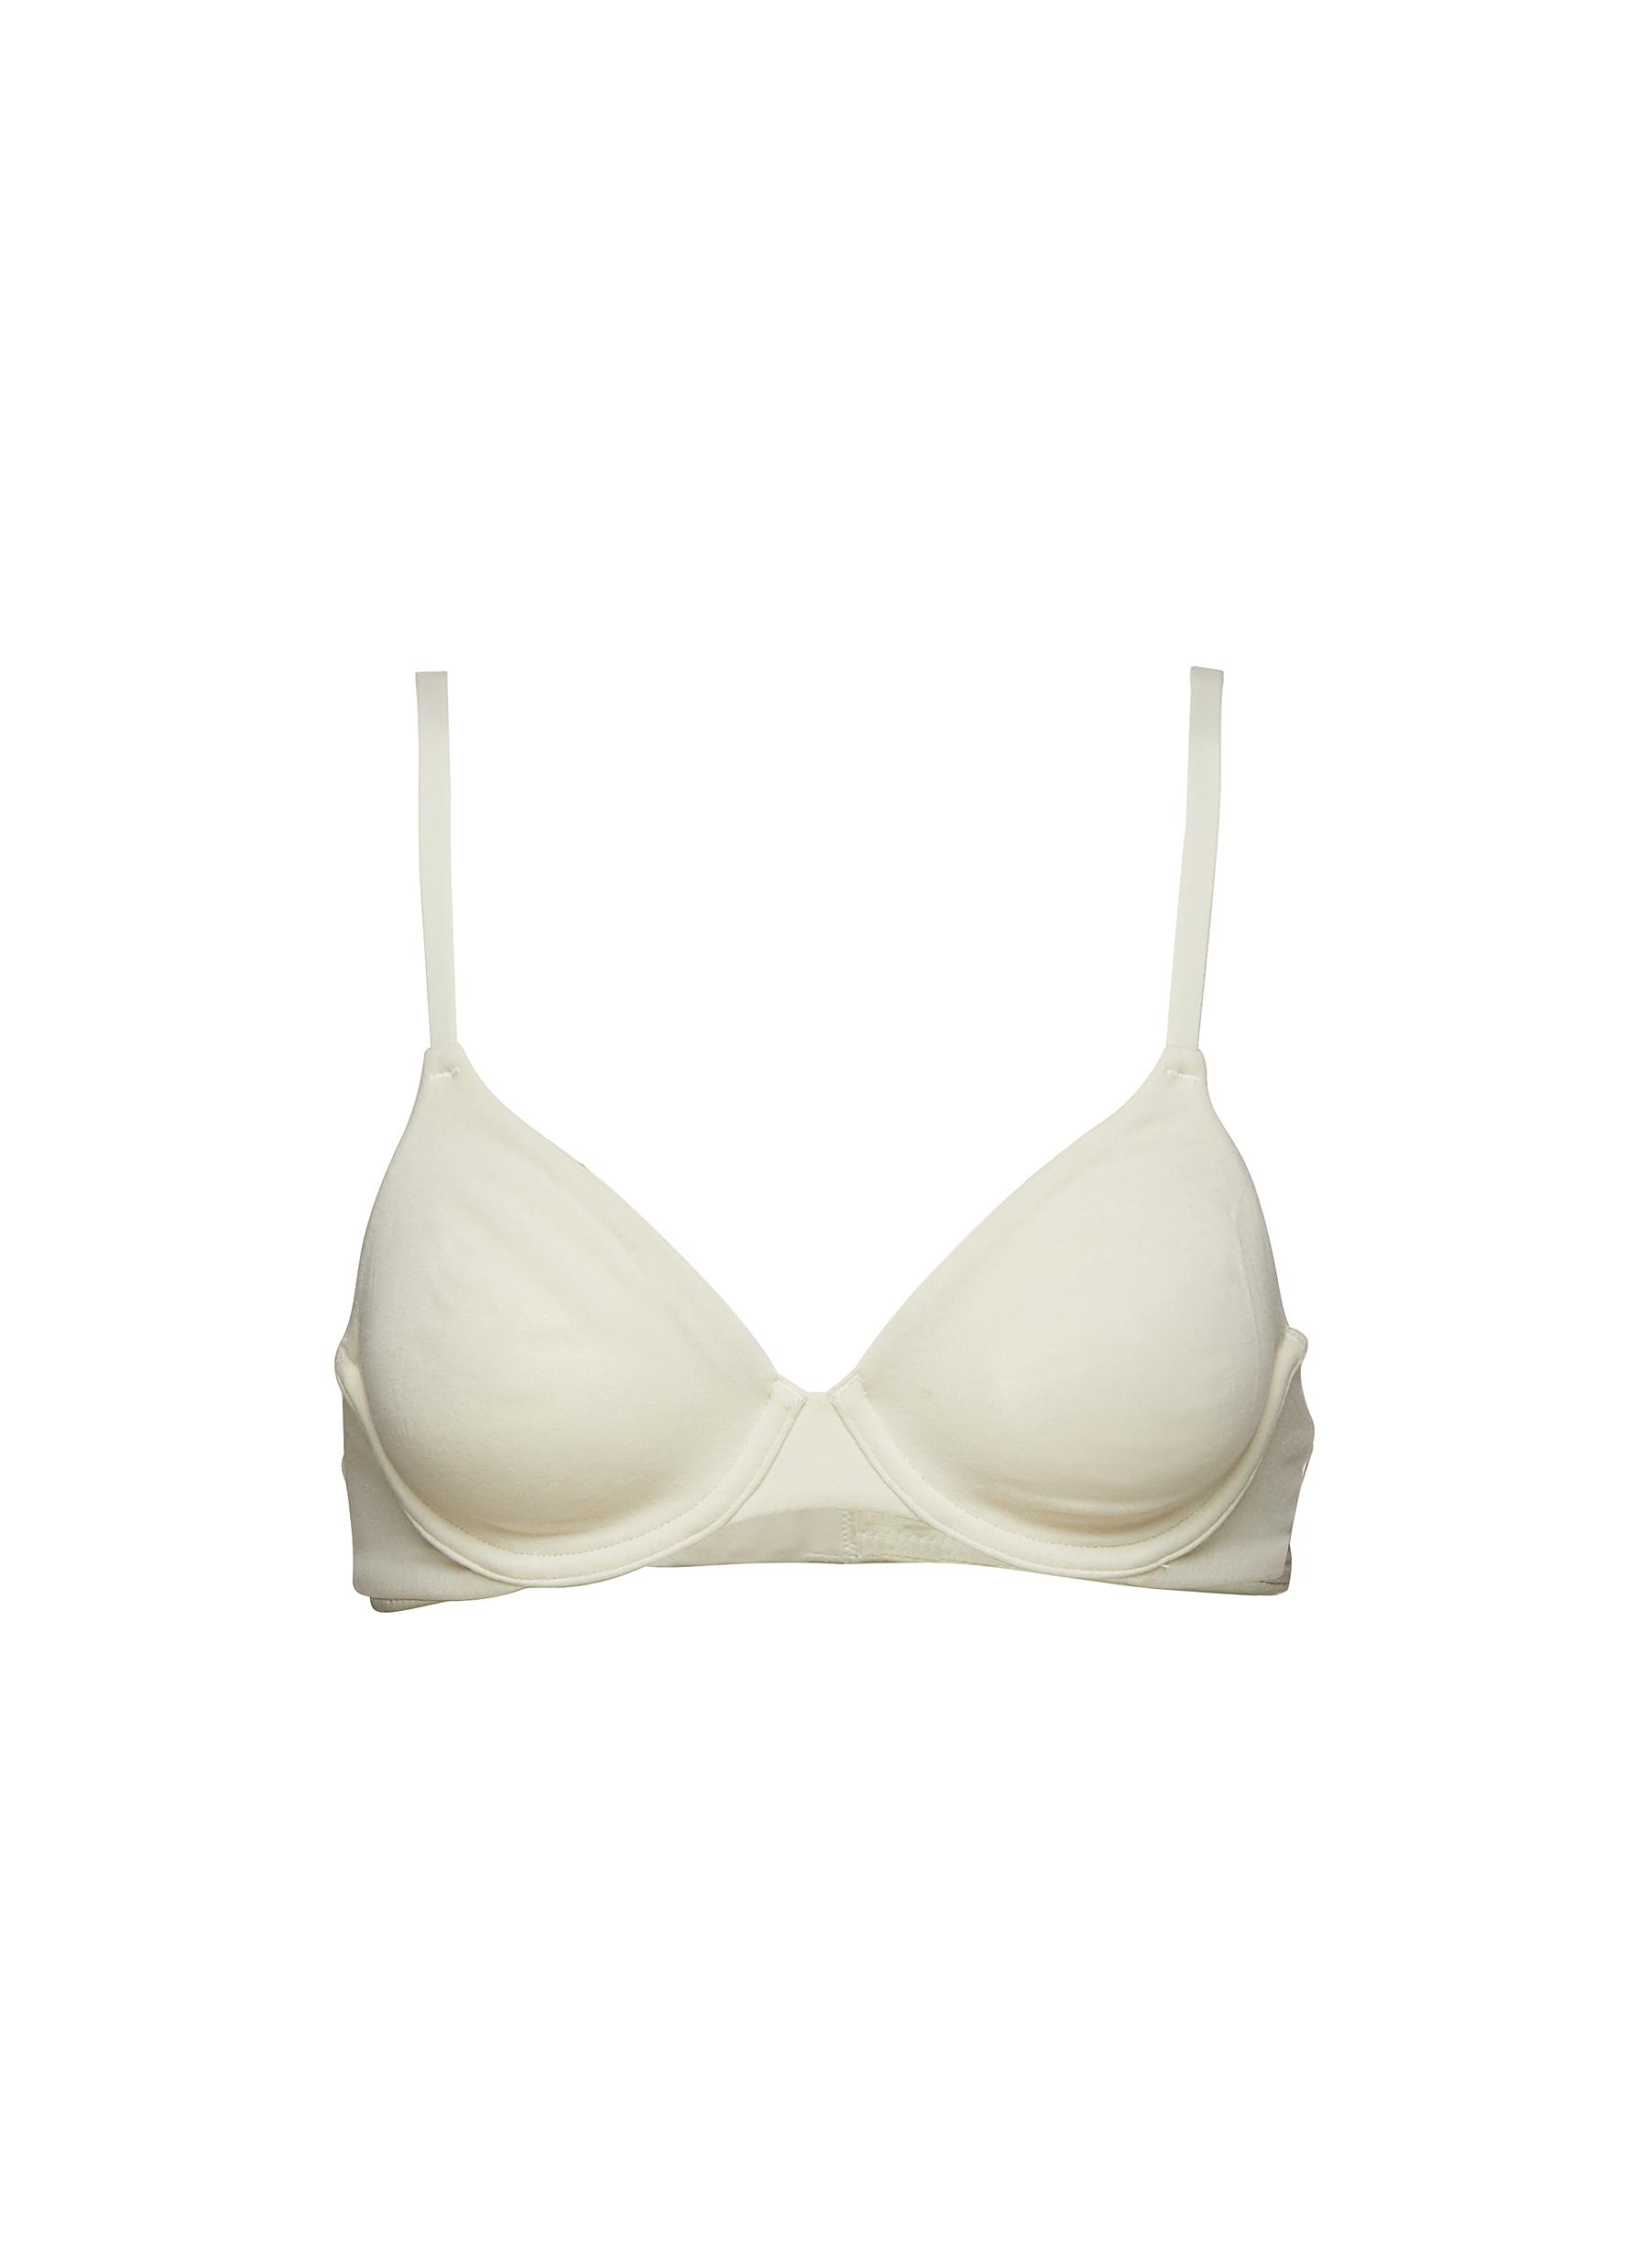 Cotton Sticky Bra in Nairobi Central - Clothing, Absolute